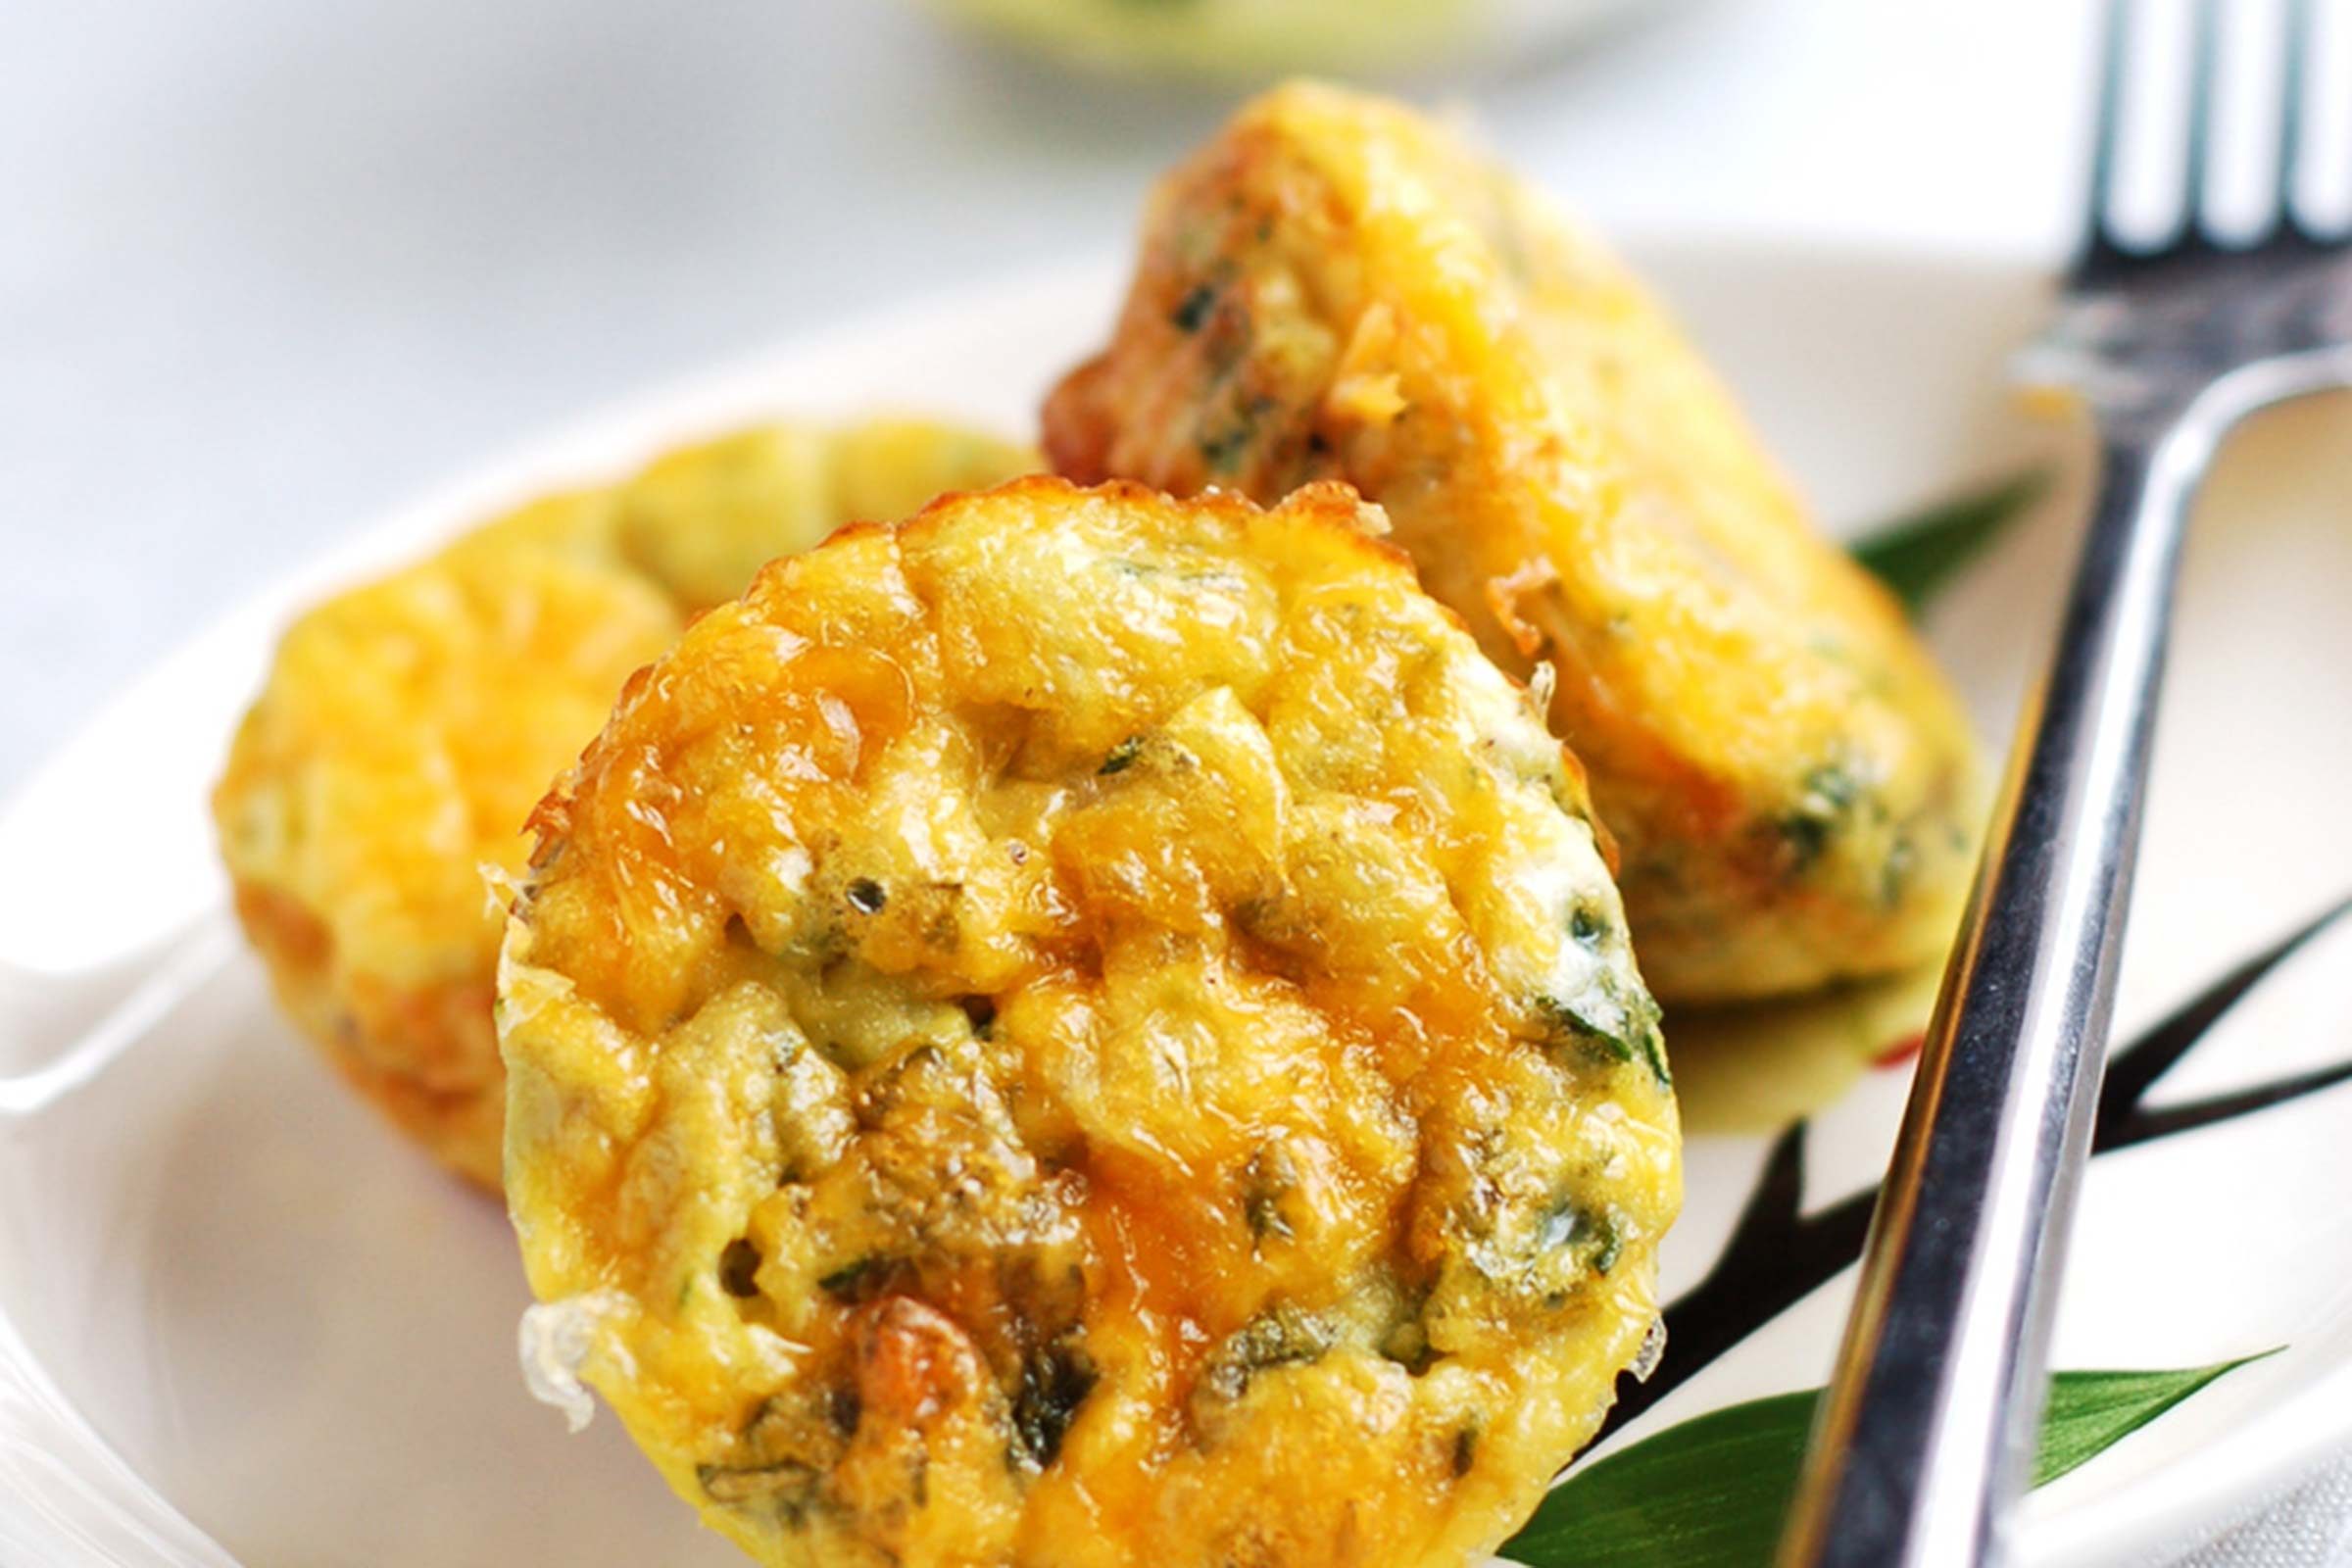 https://www.thehealthy.com/wp-content/uploads/2017/04/43-Mini-Spinach-Sweet-Potato-Frittatas-Delicious-Ways-to-Cook-Eggs-createkidsclub.co_.jpg?fit=700%2C467